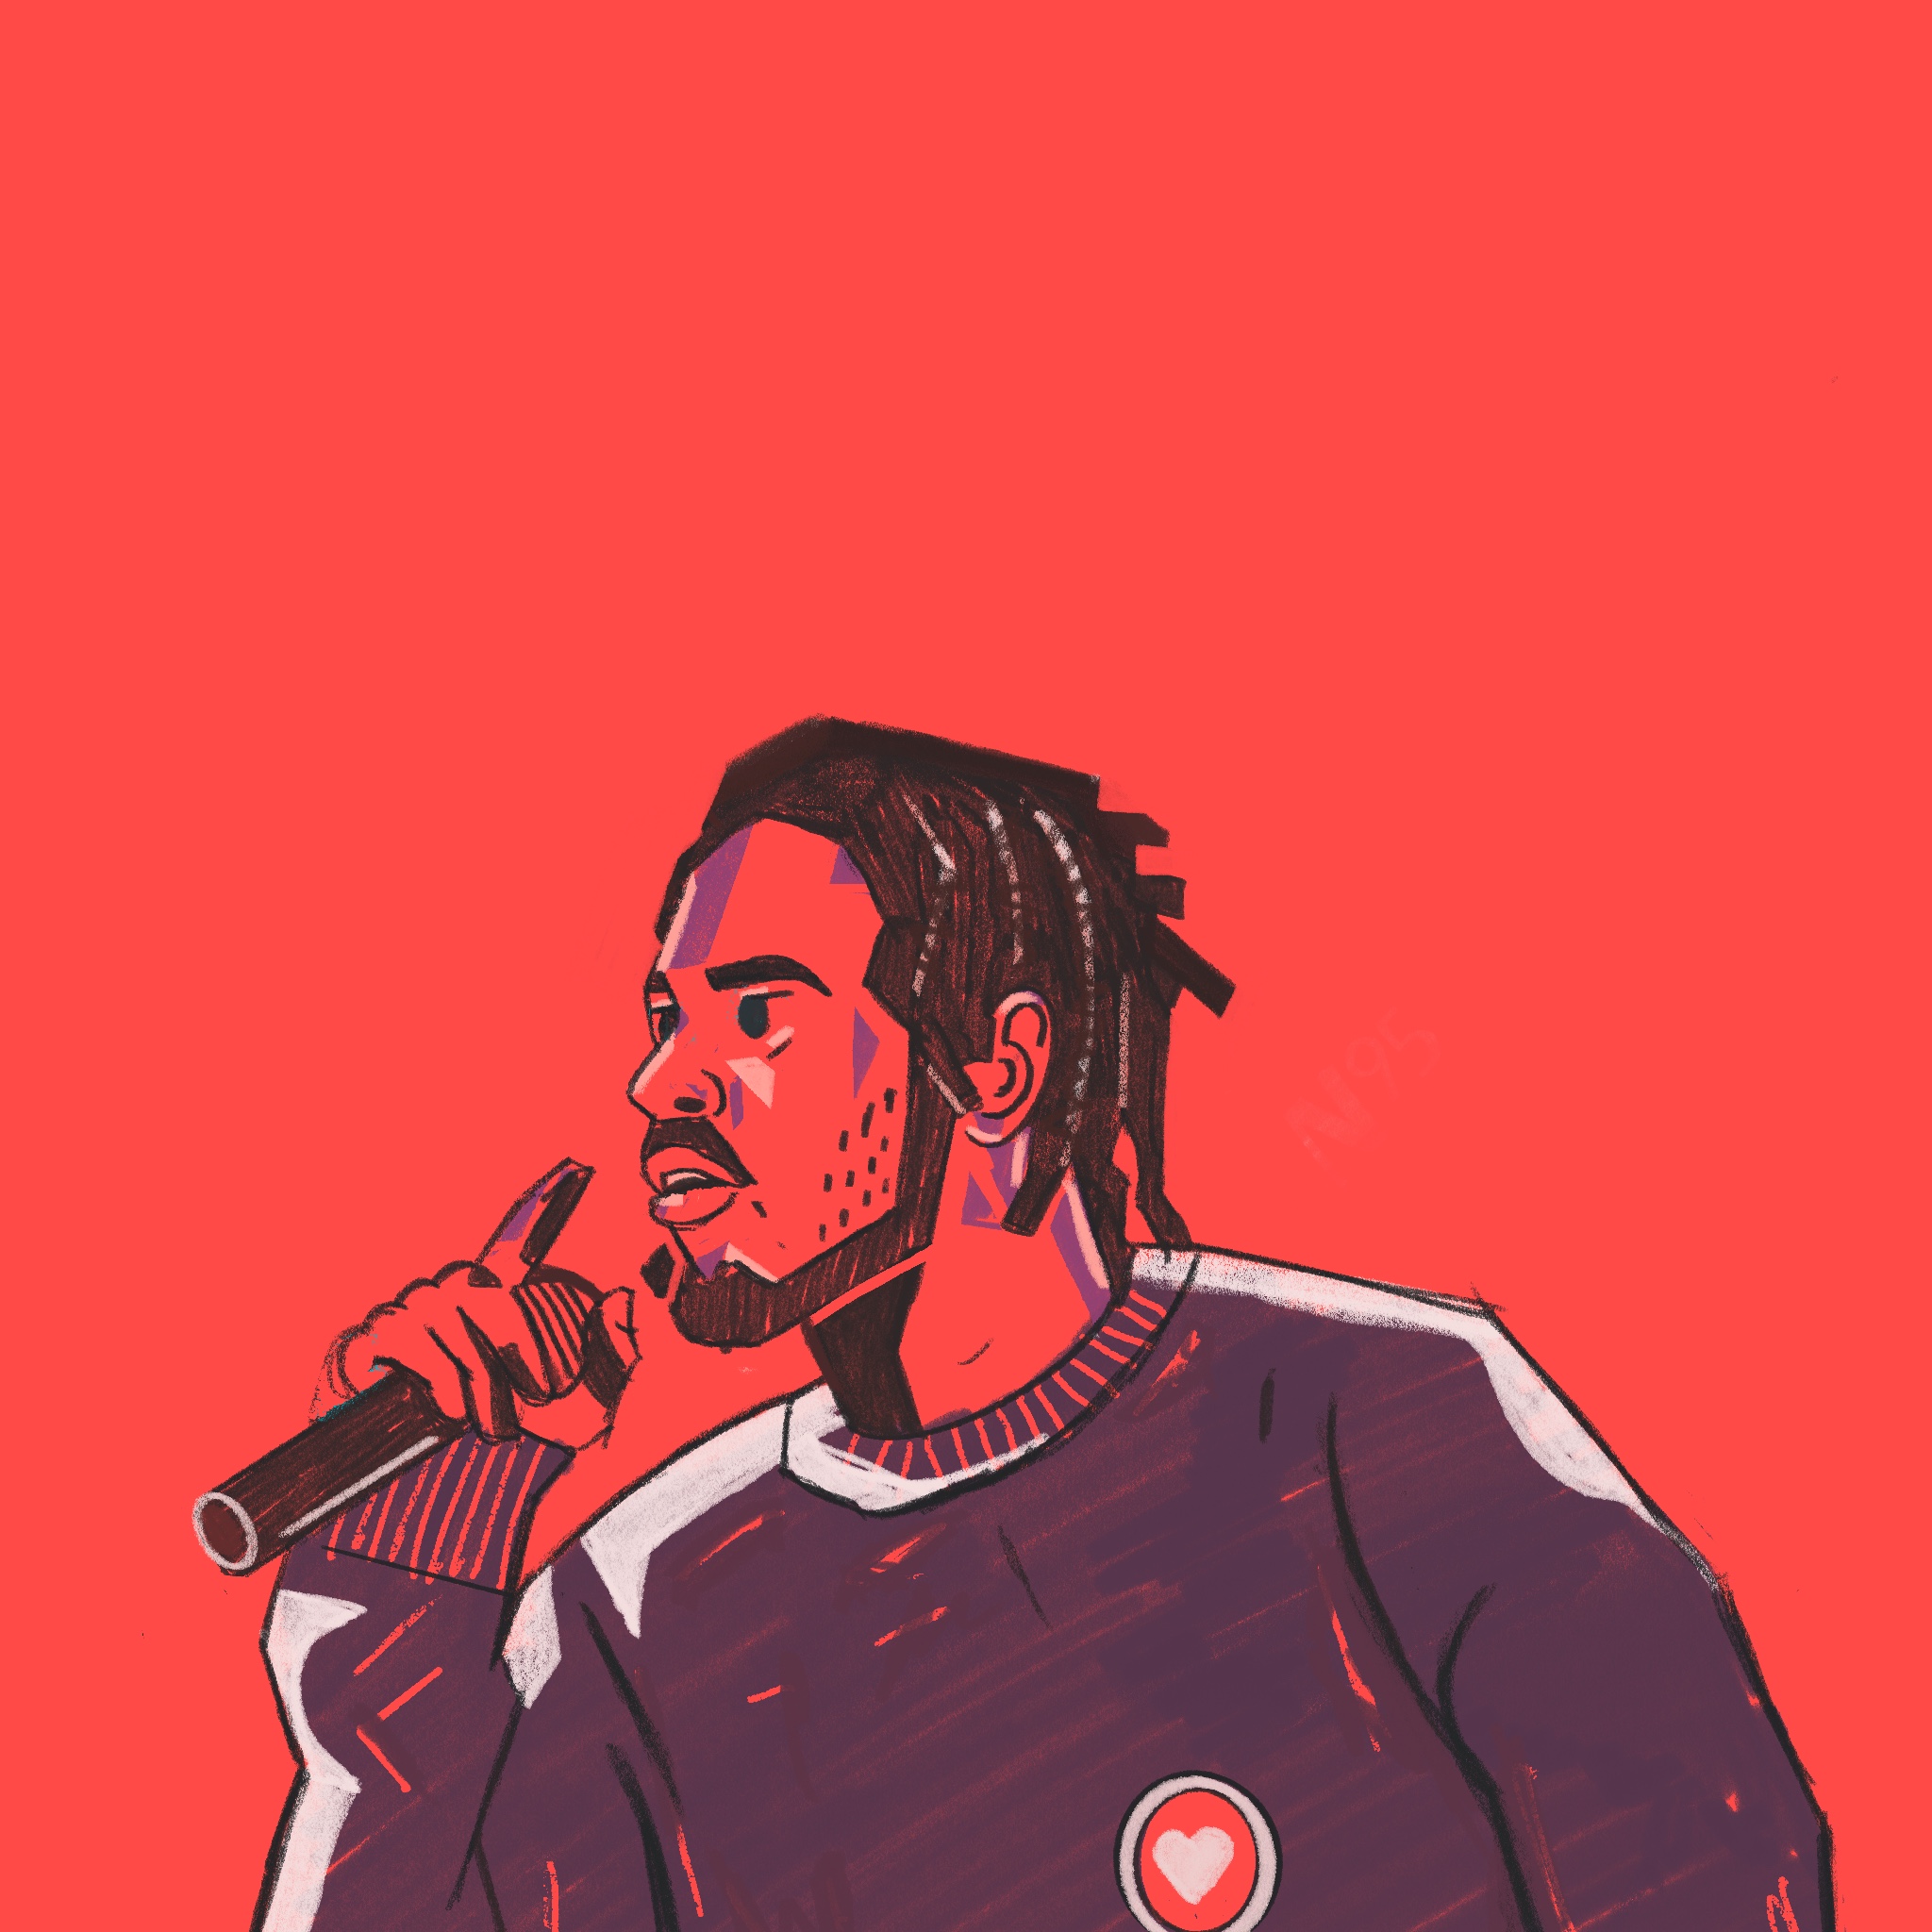 Best 9 Kendrick Lamar Wallpapers  NSF  Music Magazine Canvas Art Poster  And Wall Art Picture Print Modern Family Bedroom Decor Posters  Framestyle12x18inch30x45cm  Amazonca Home